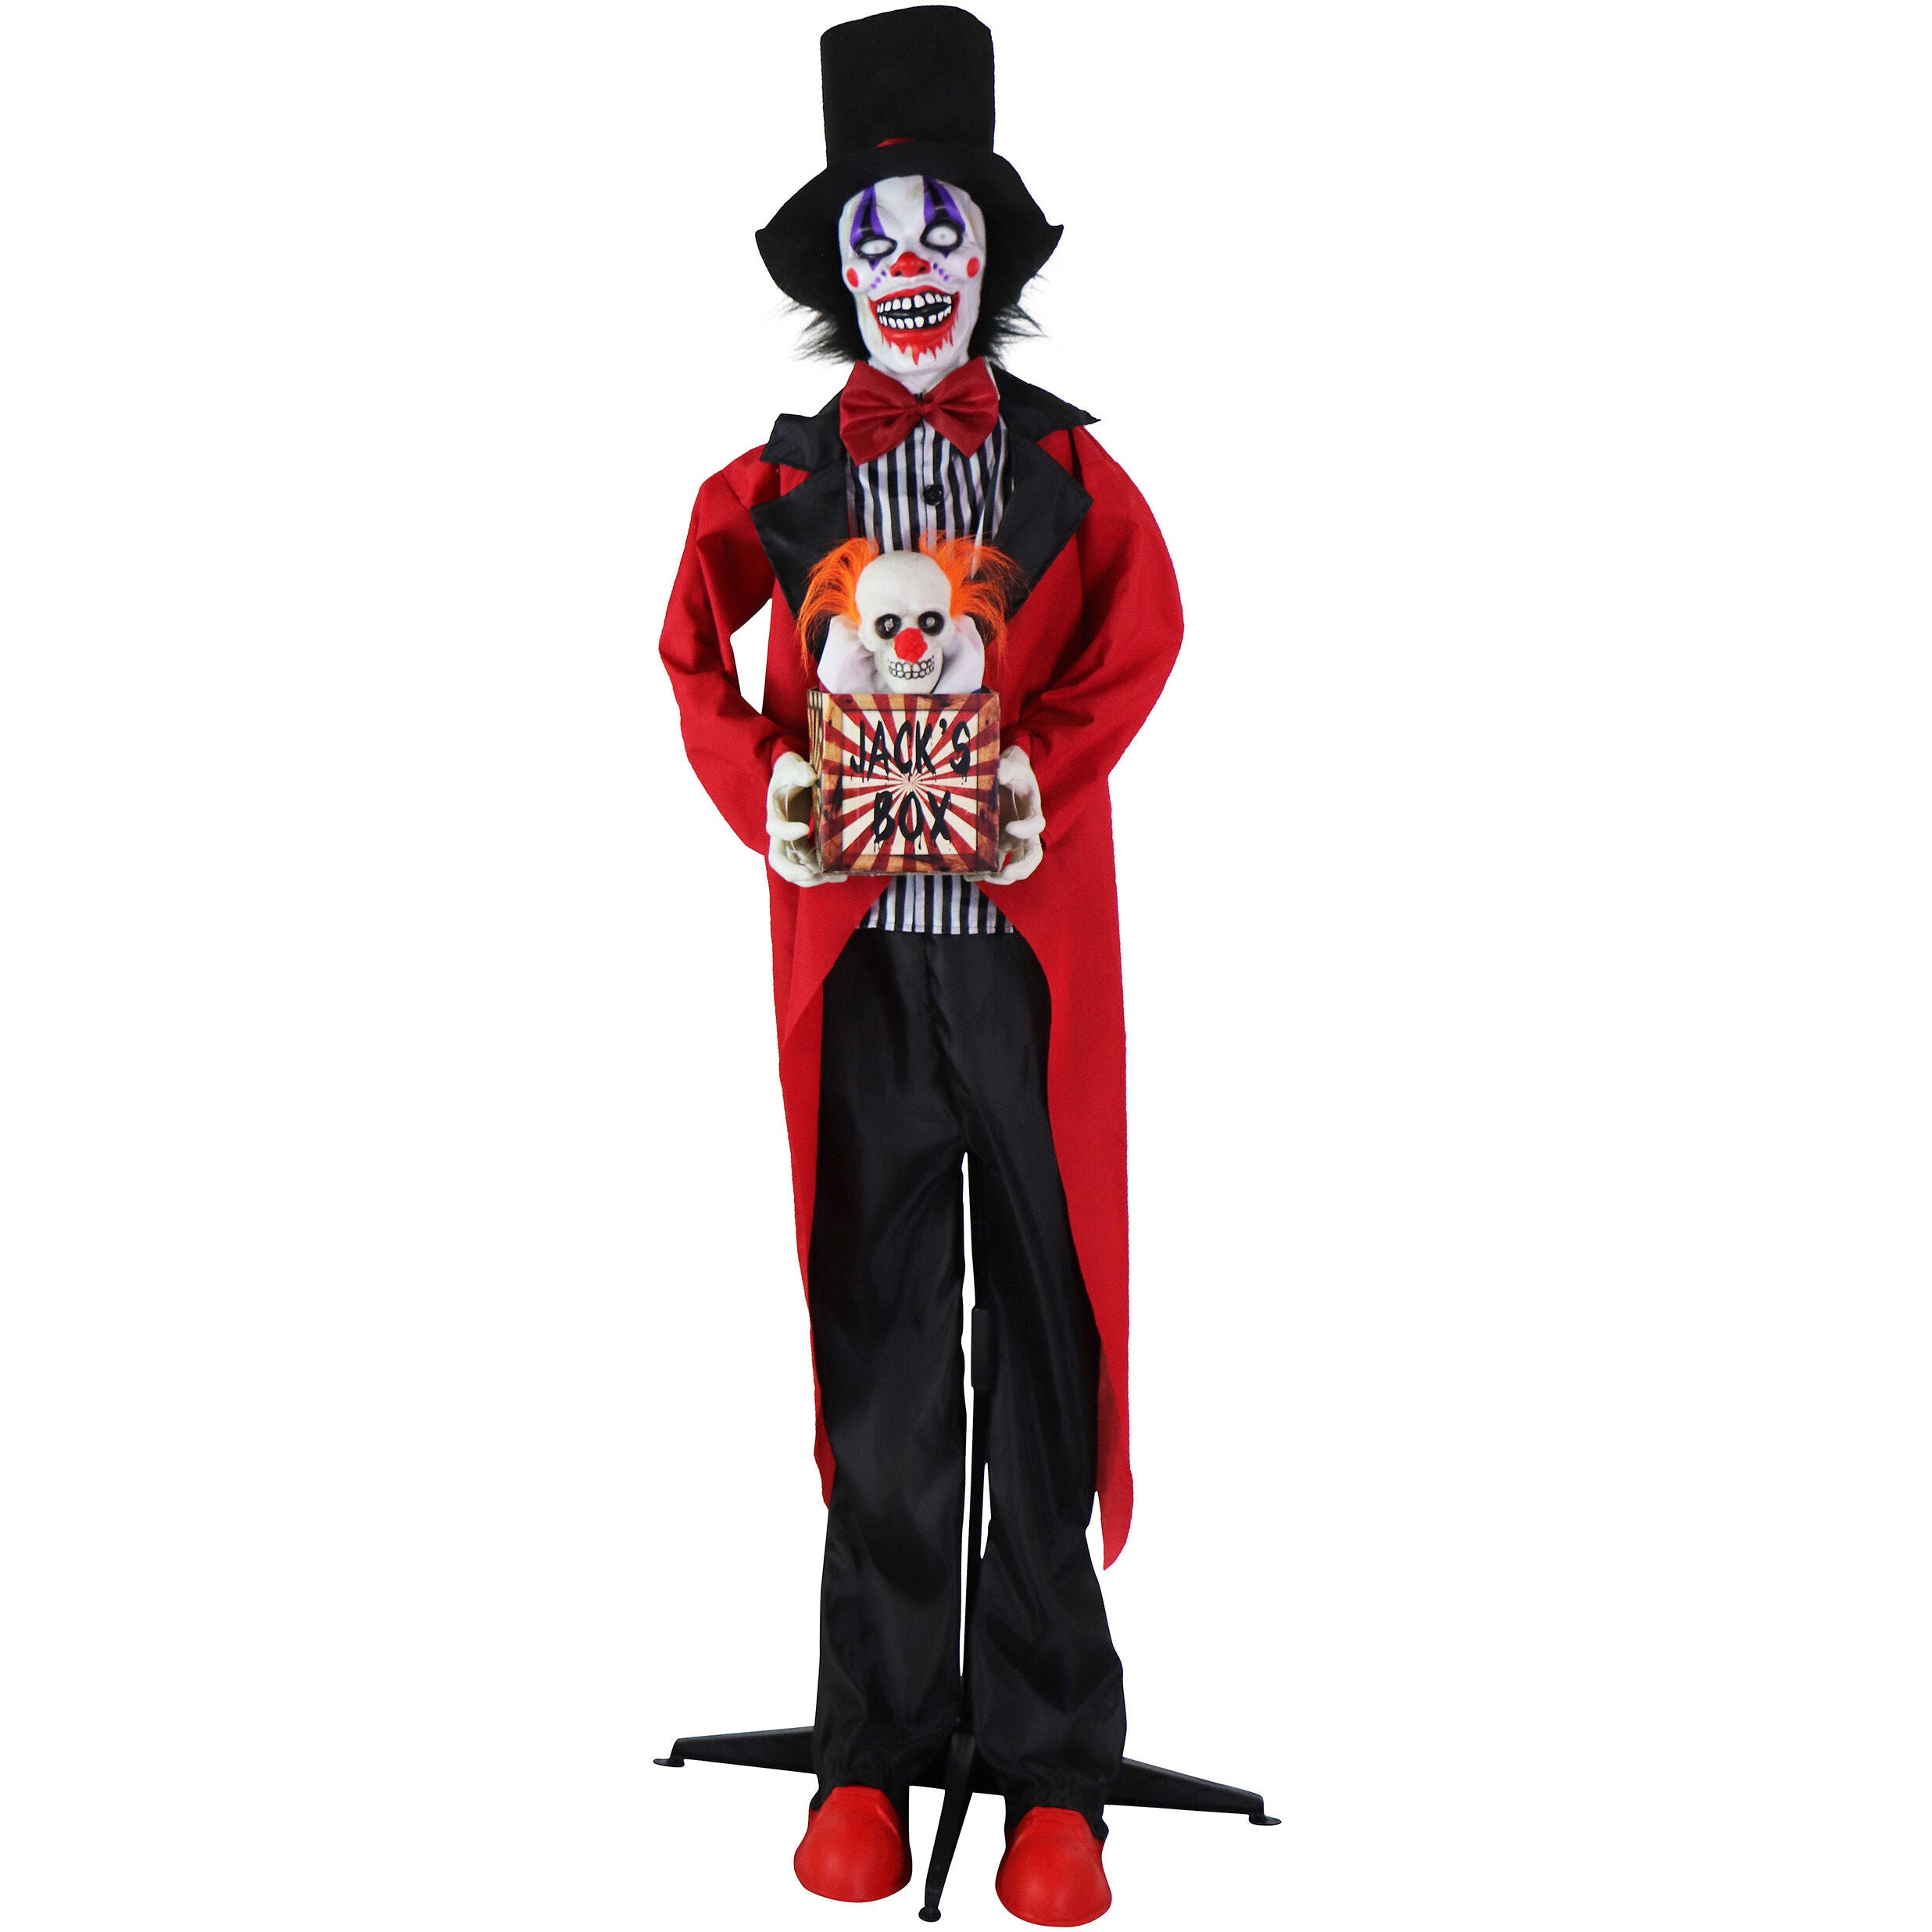 Haunted Hill Farm - Standing Clown and Animatronic Talking Skull Clown in a Box for Scary Halloween Decoration